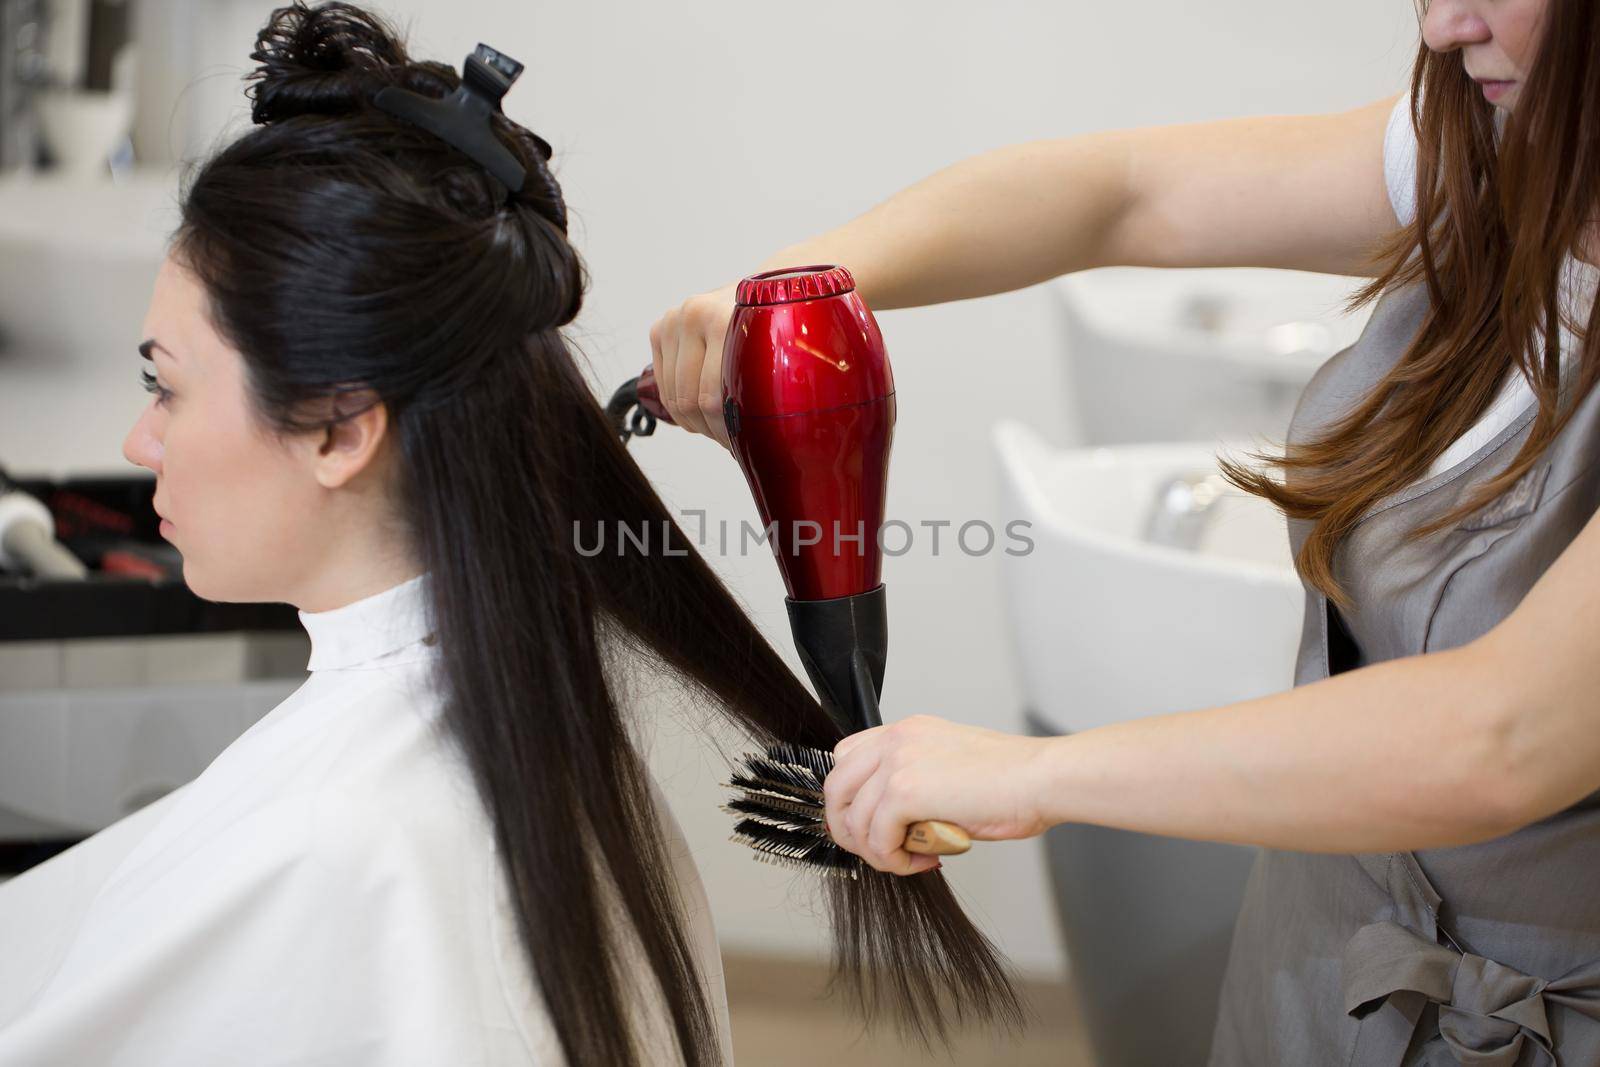 Hair stylist work on woman hairstyle in salon. Drying long brown hair with hair dryer and round brush